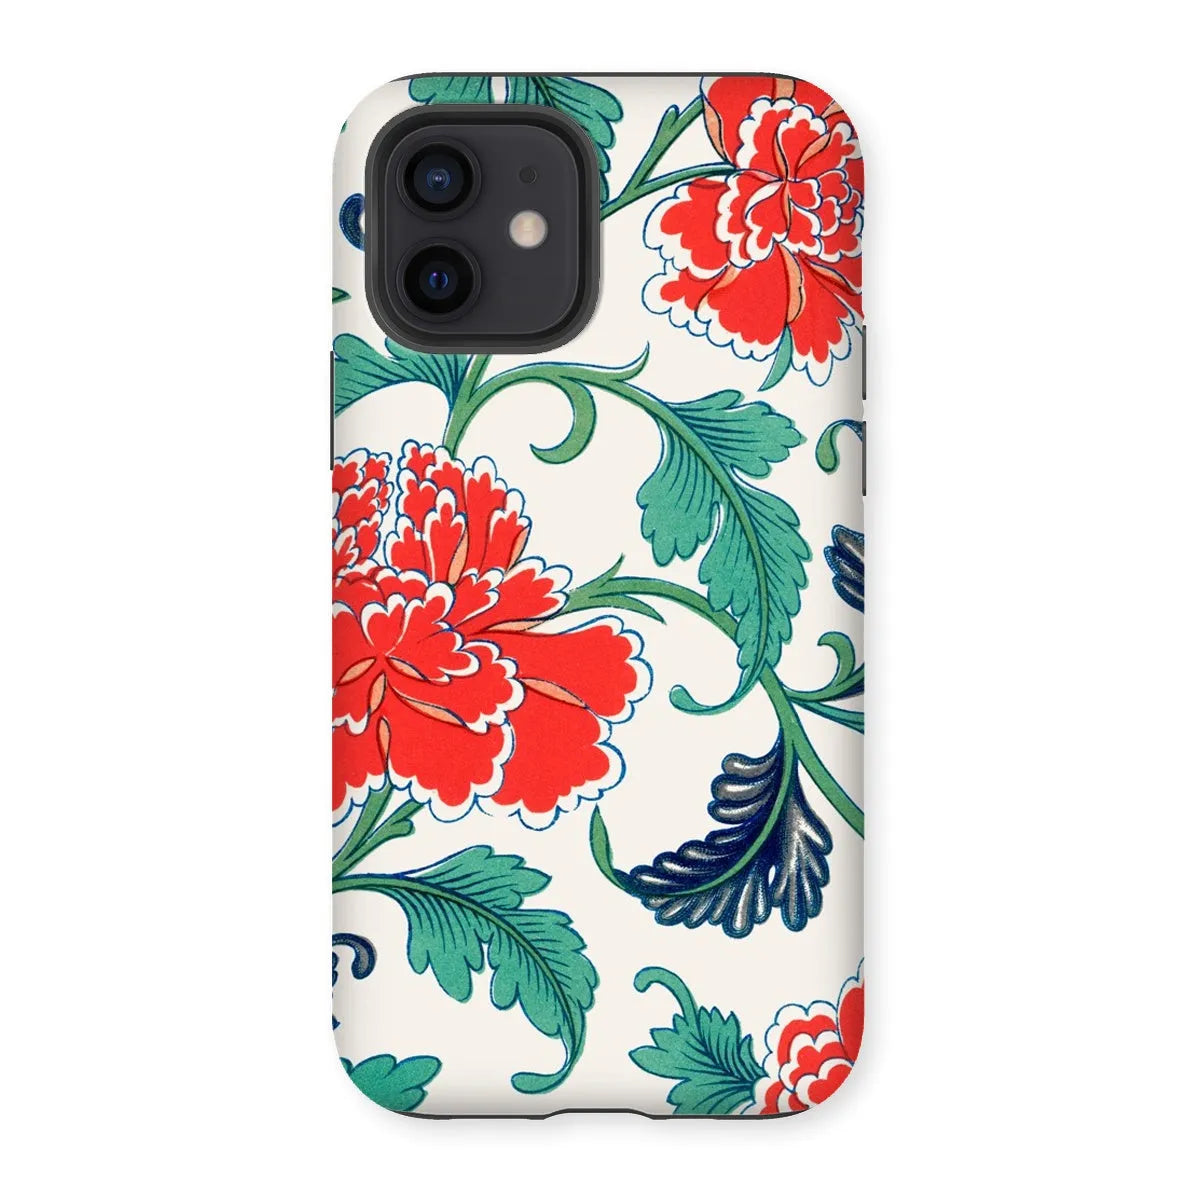 Red Floral Chinese Aesthetic Pattern Phone Case - Owen Jones - Iphone 12 / Matte - Mobile Phone Cases - Aesthetic Art